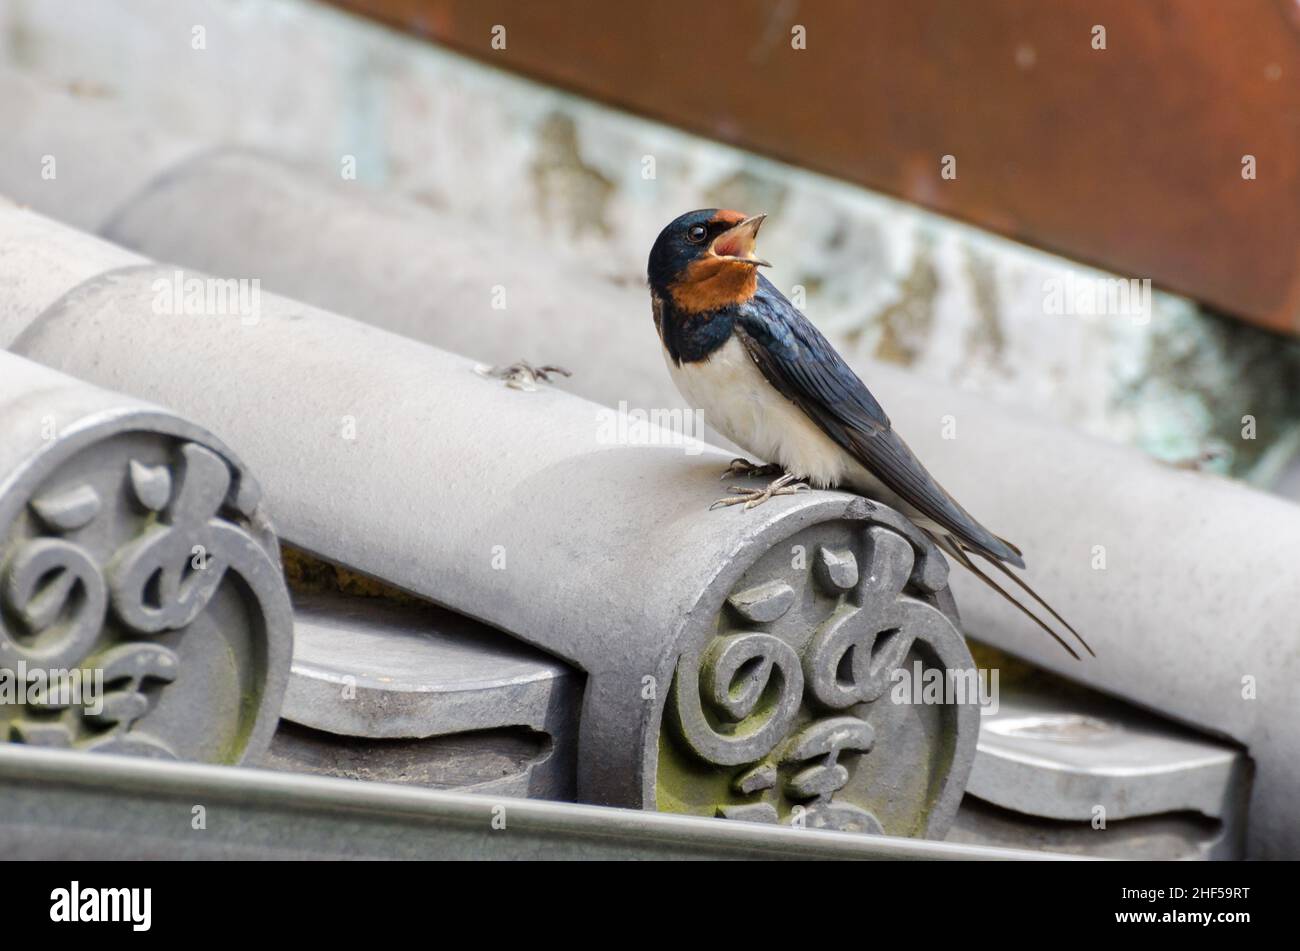 Tiny swallows perch on the roofs of houses in Okage Yokocho, Ise, Japan. Stock Photo